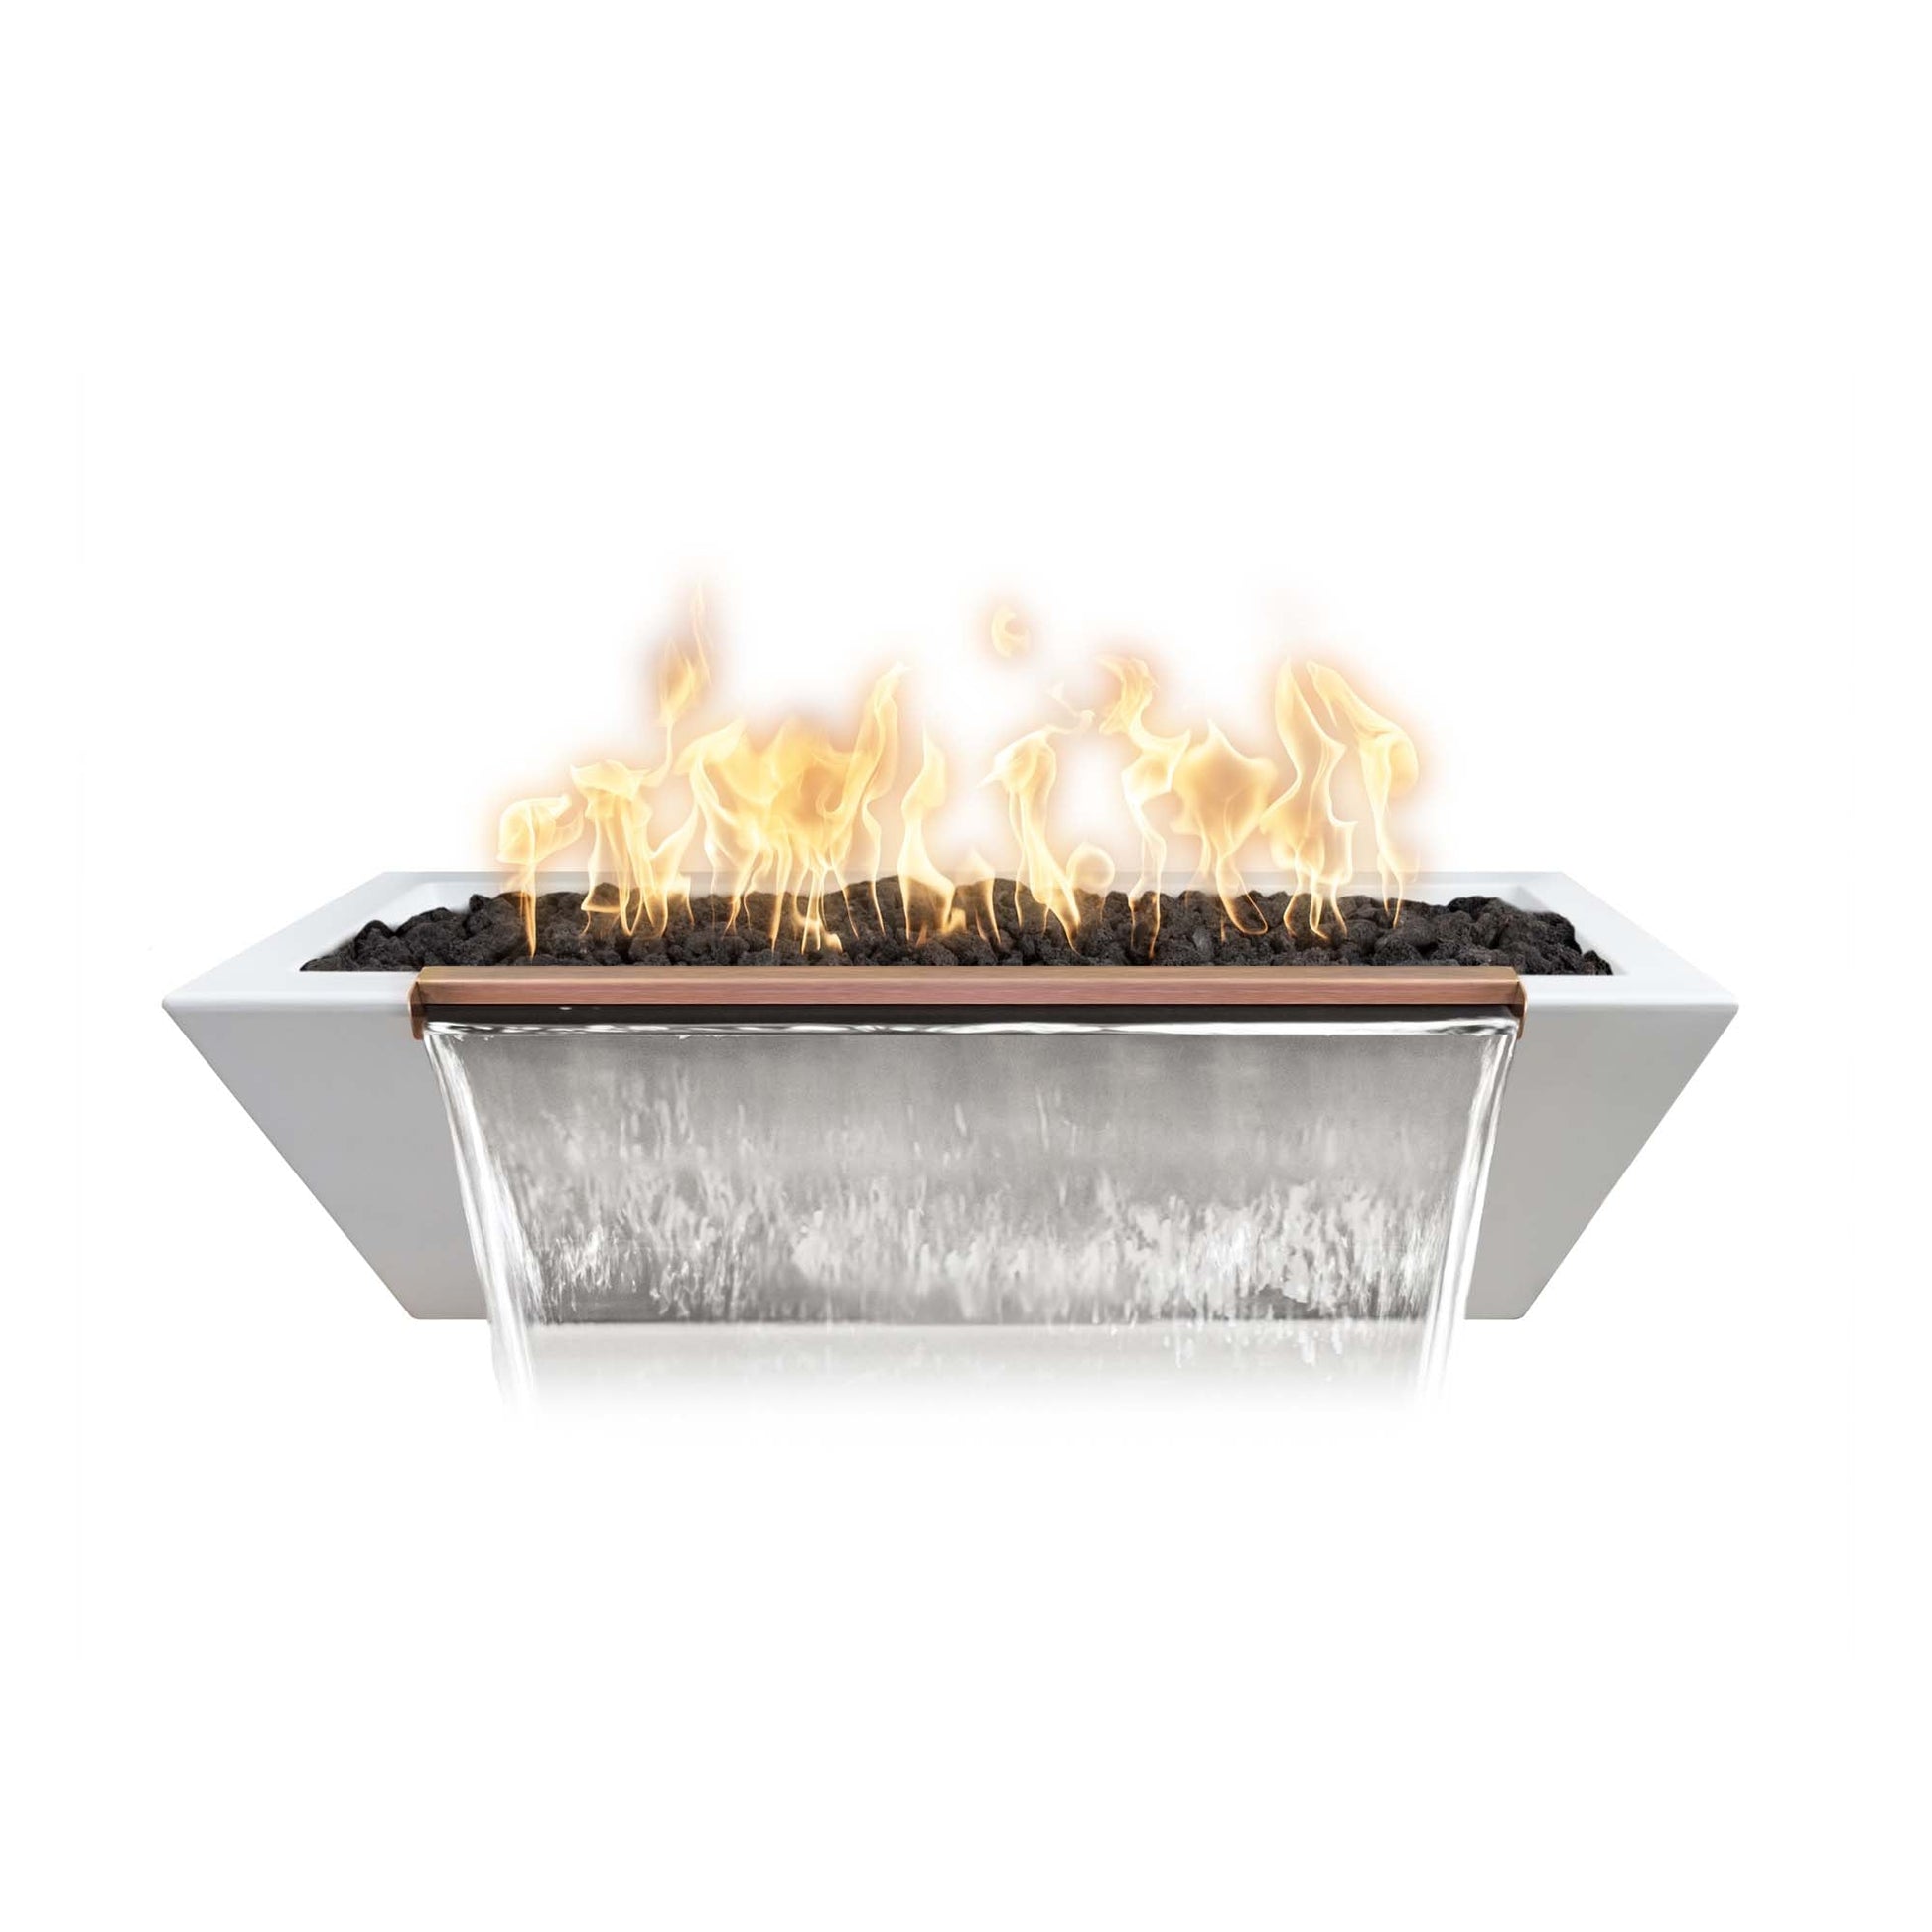 The Outdoor Plus Linear Maya 72" Black GFRC Concrete Liquid Propane Fire & Water Bowl with 12V Electronic Ignition